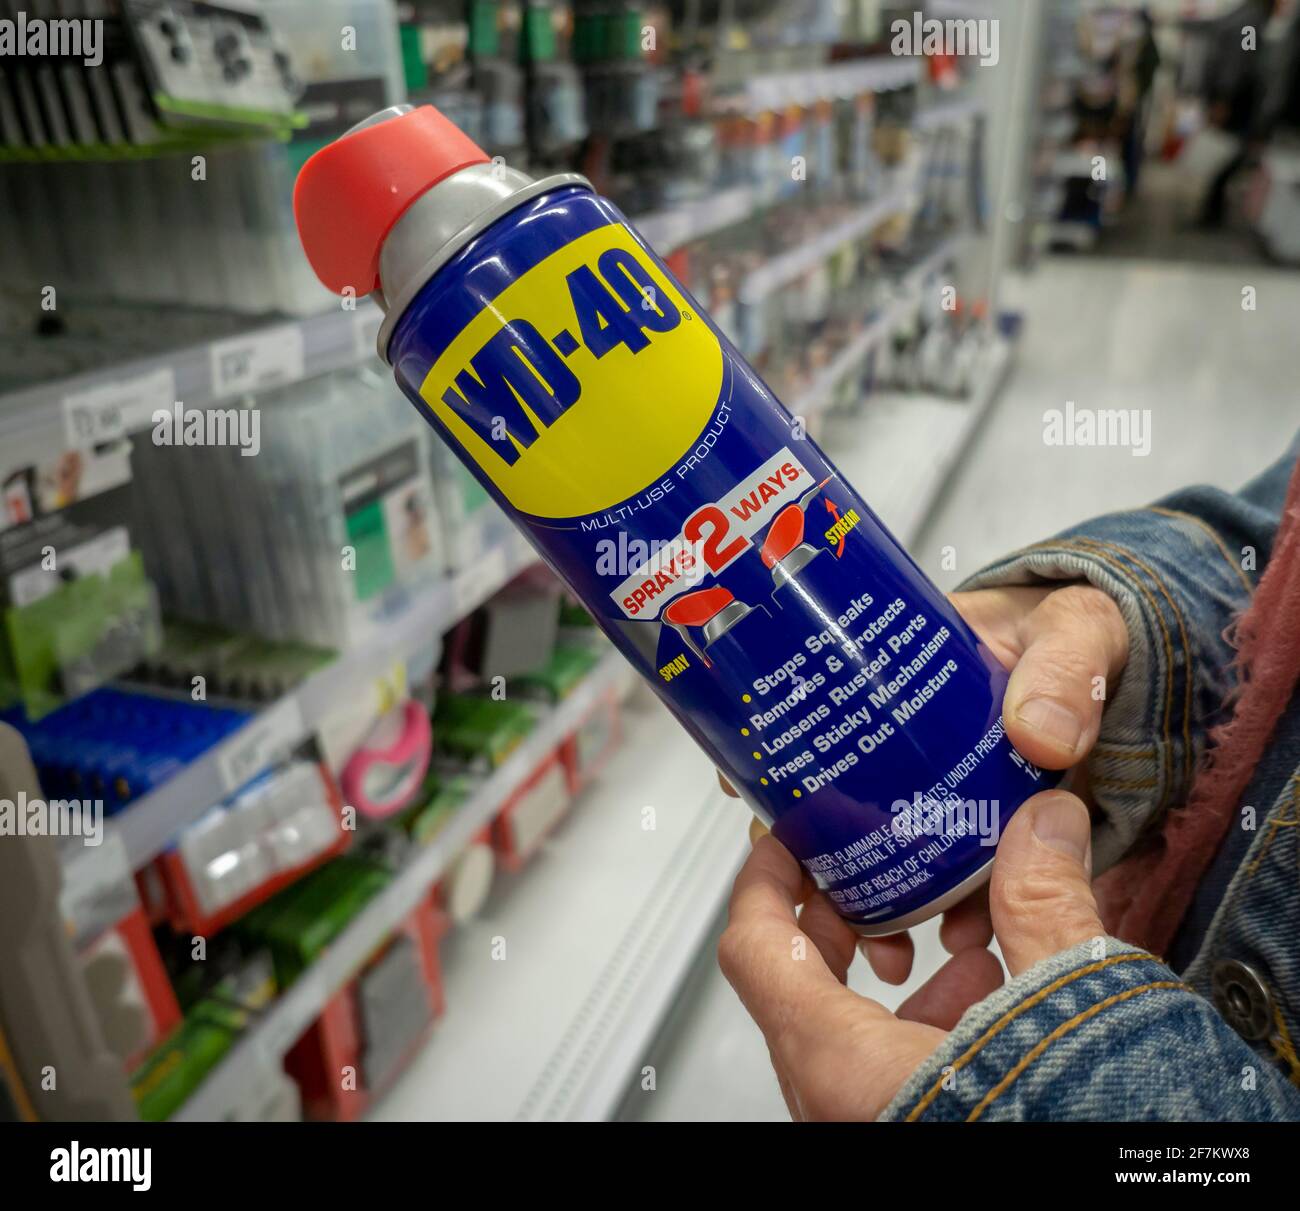 New York, USA. 15th Oct, 2018. A shopper buys a can of WD-40 spray lubricant in a store in New York on Monday, October 15, 2018. (Photo by Richard B. Levine) Credit: Sipa USA/Alamy Live News Stock Photo